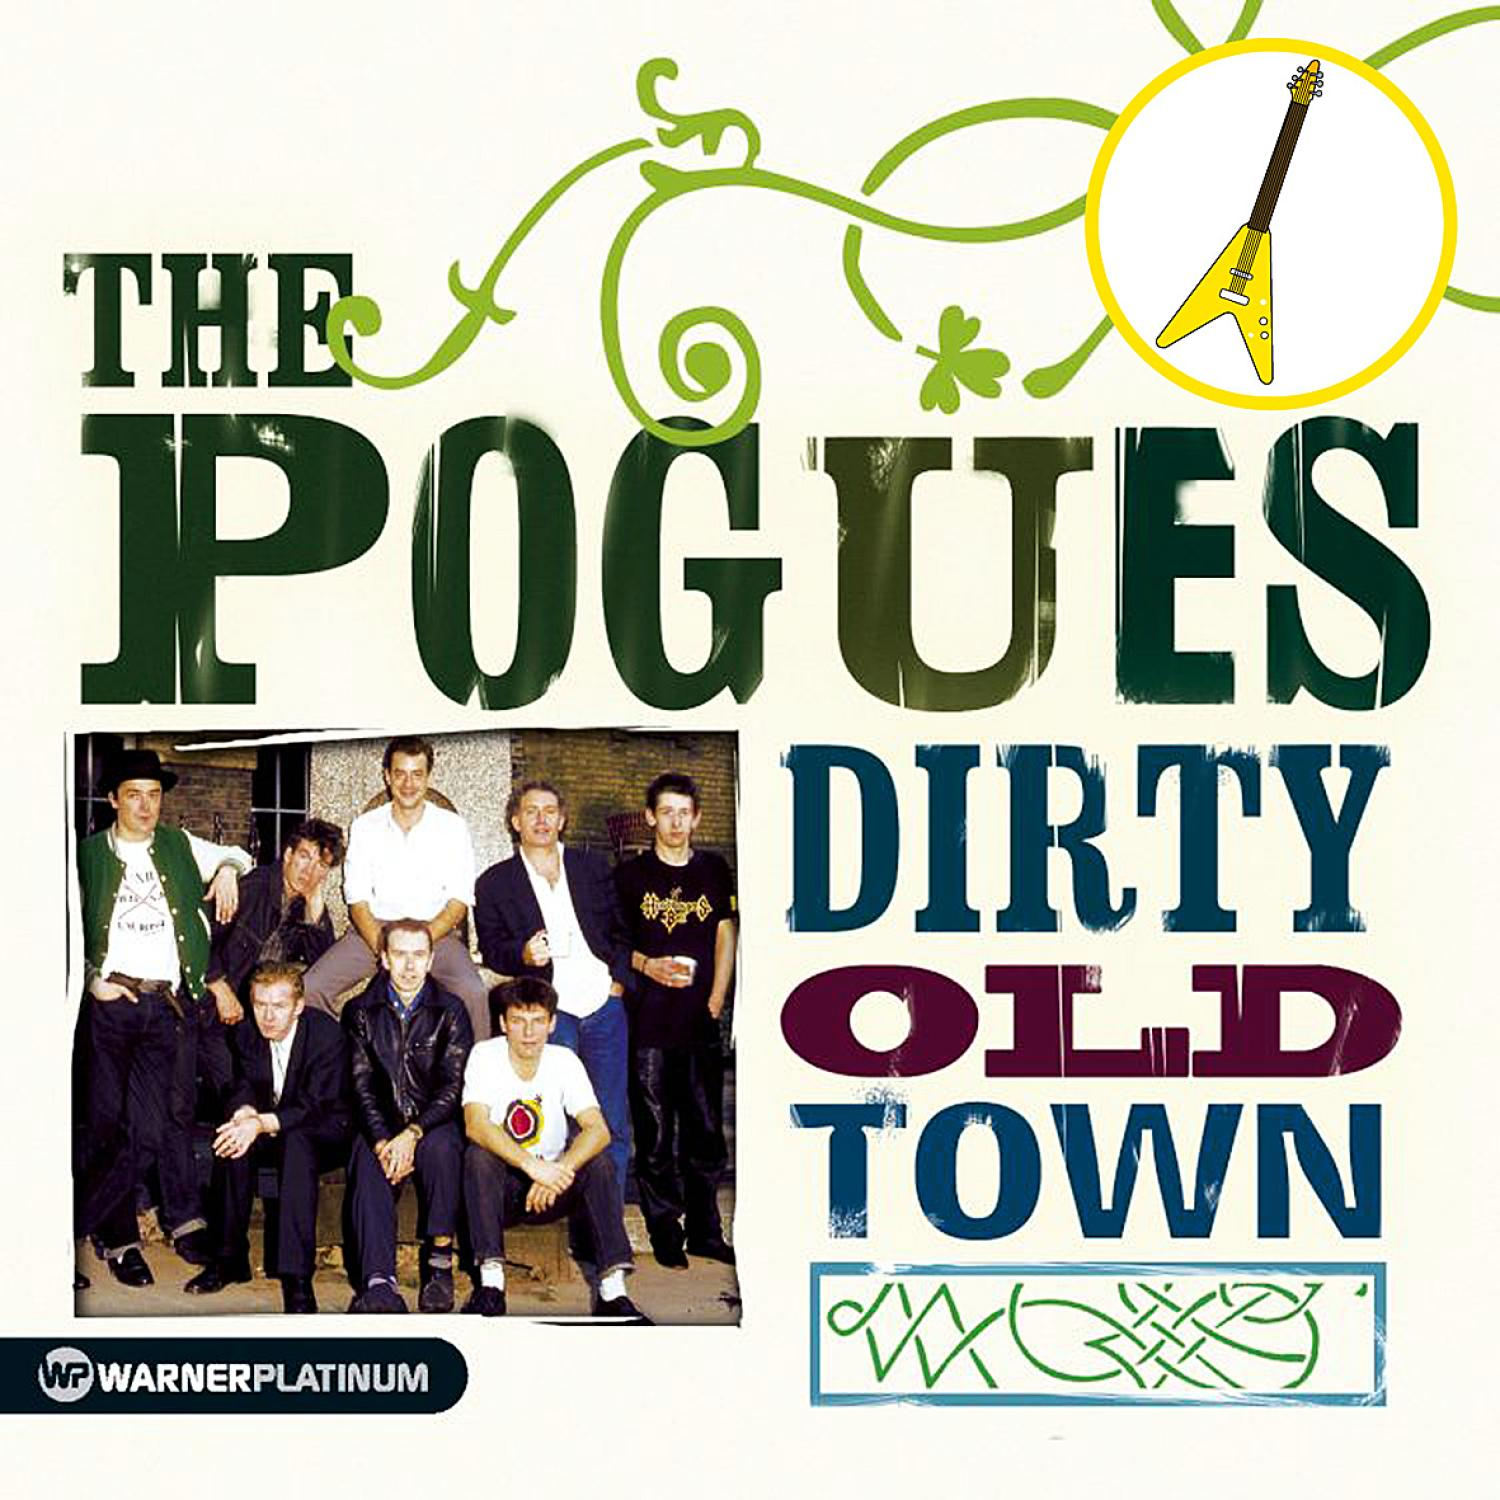 The Pogues - Dirty Old - Platinum Collection (CD) Town 